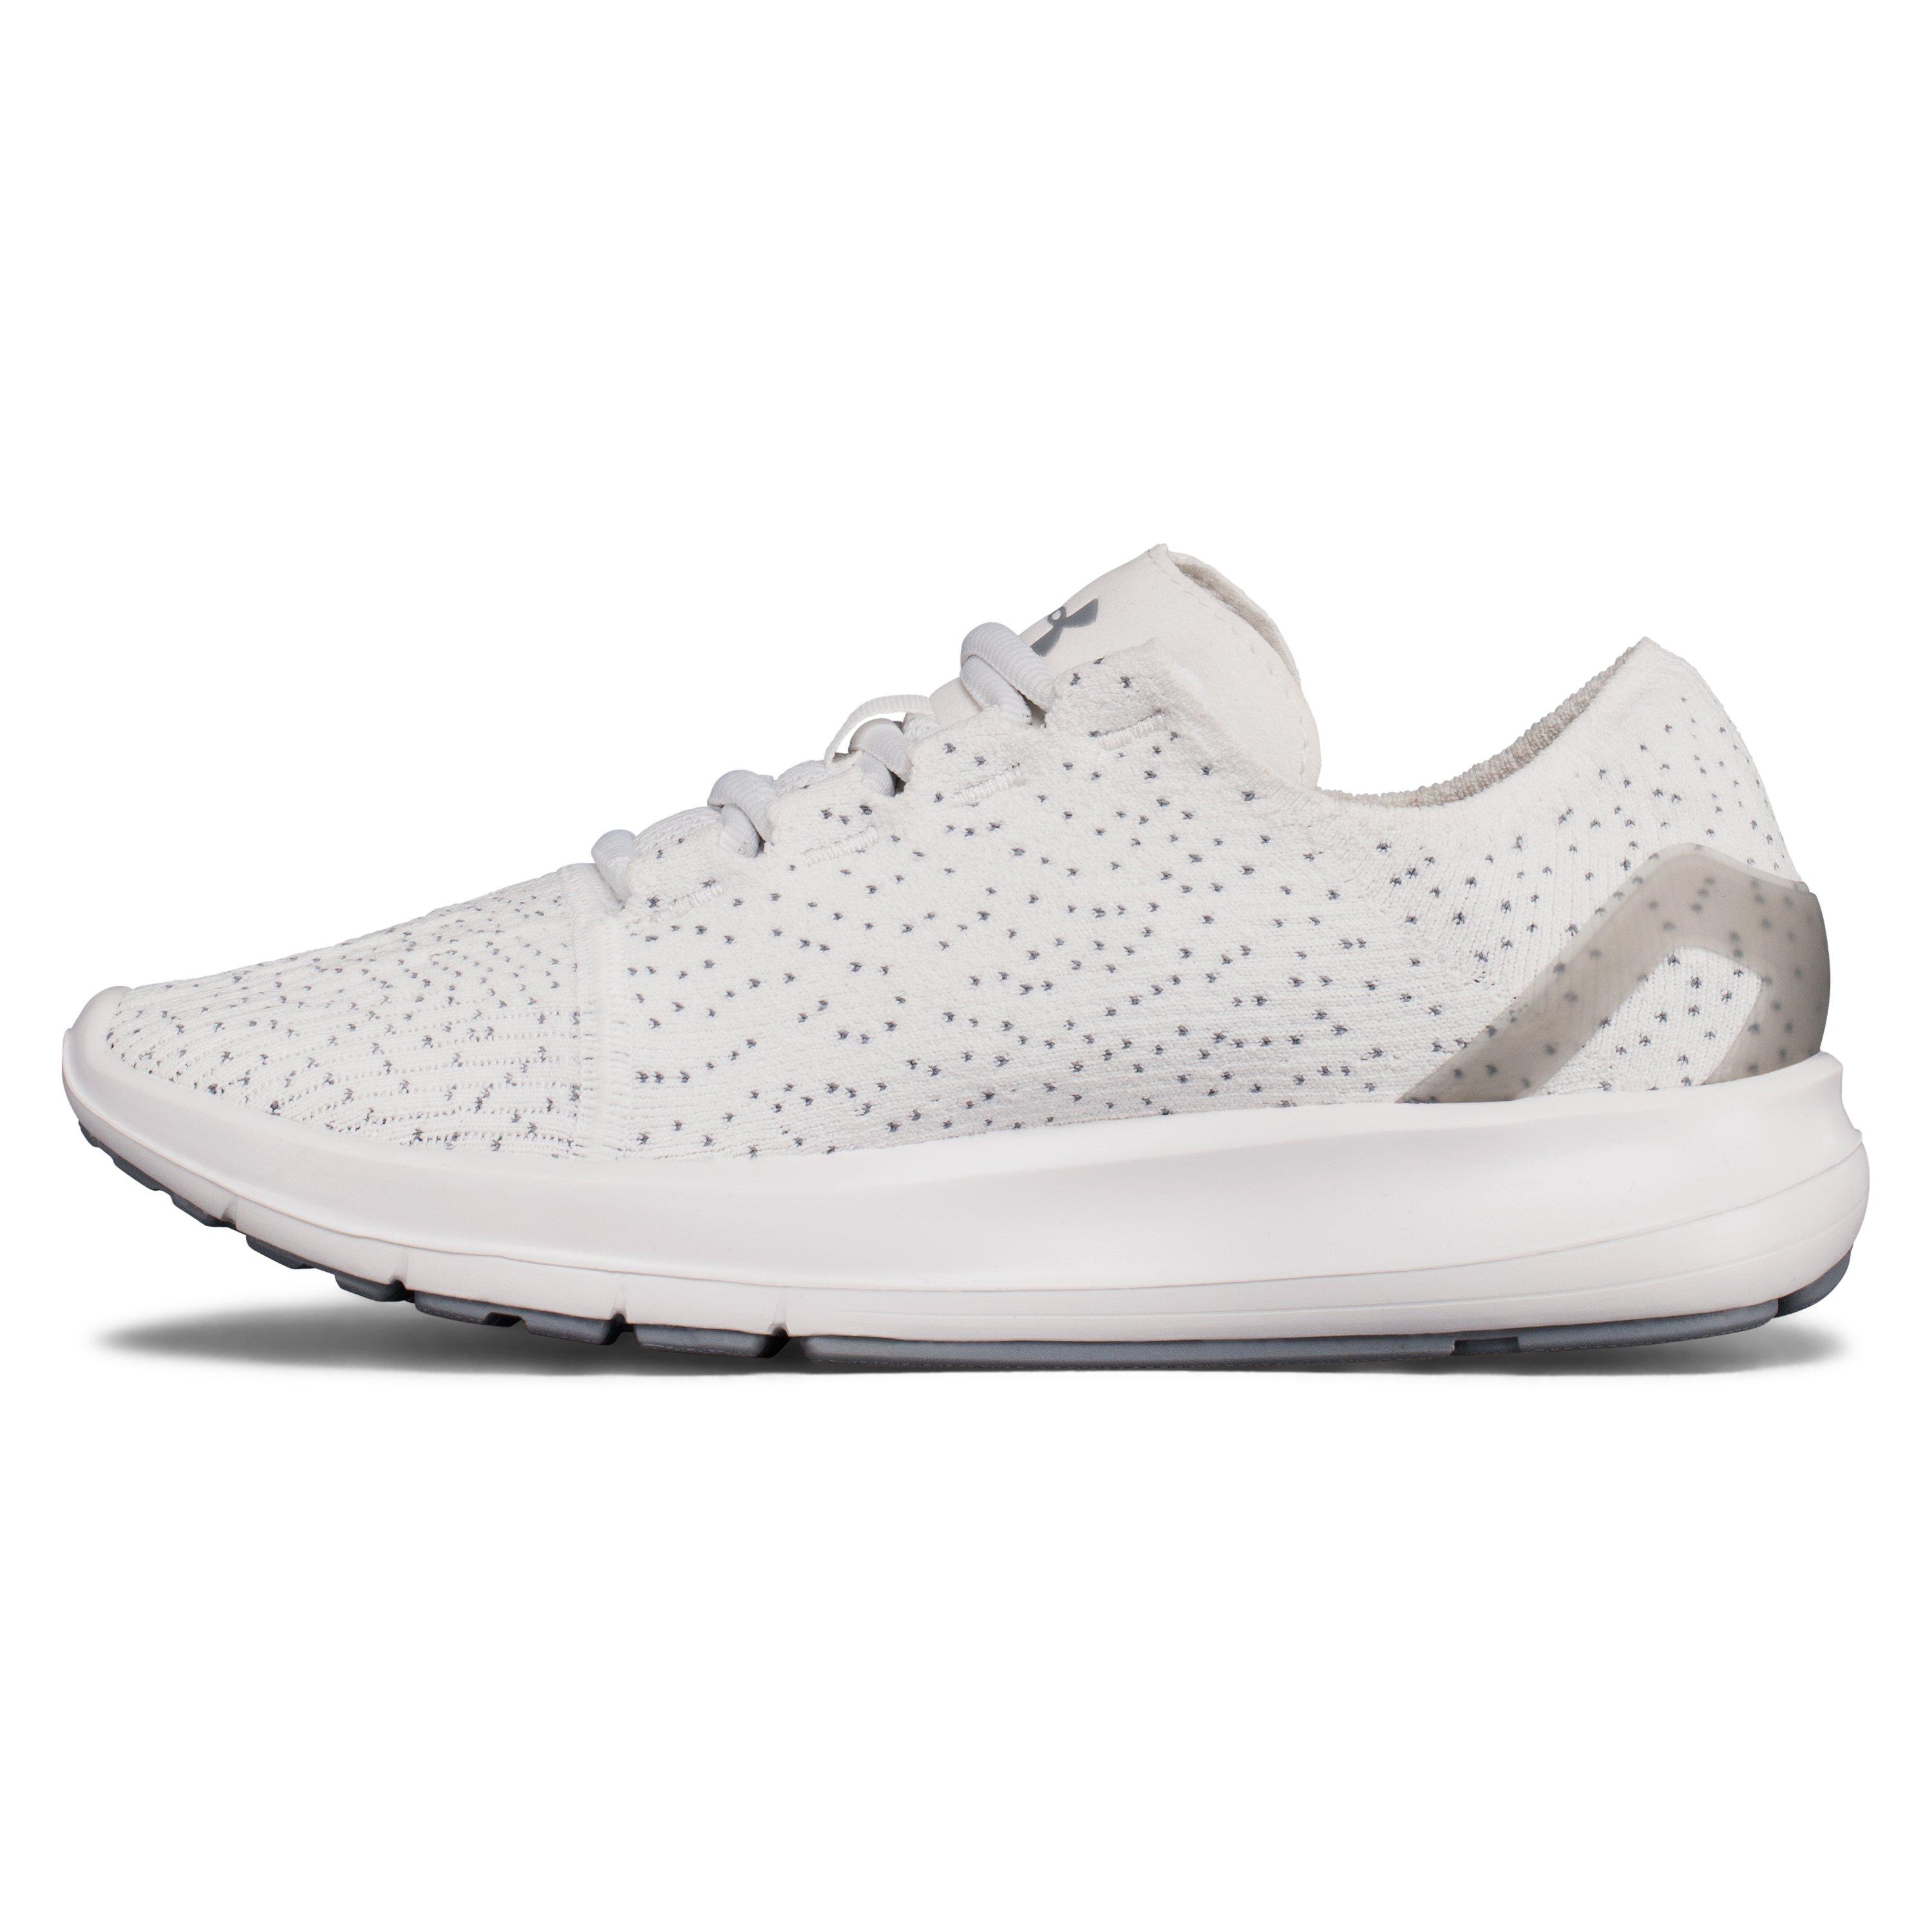 under armour white women's shoes